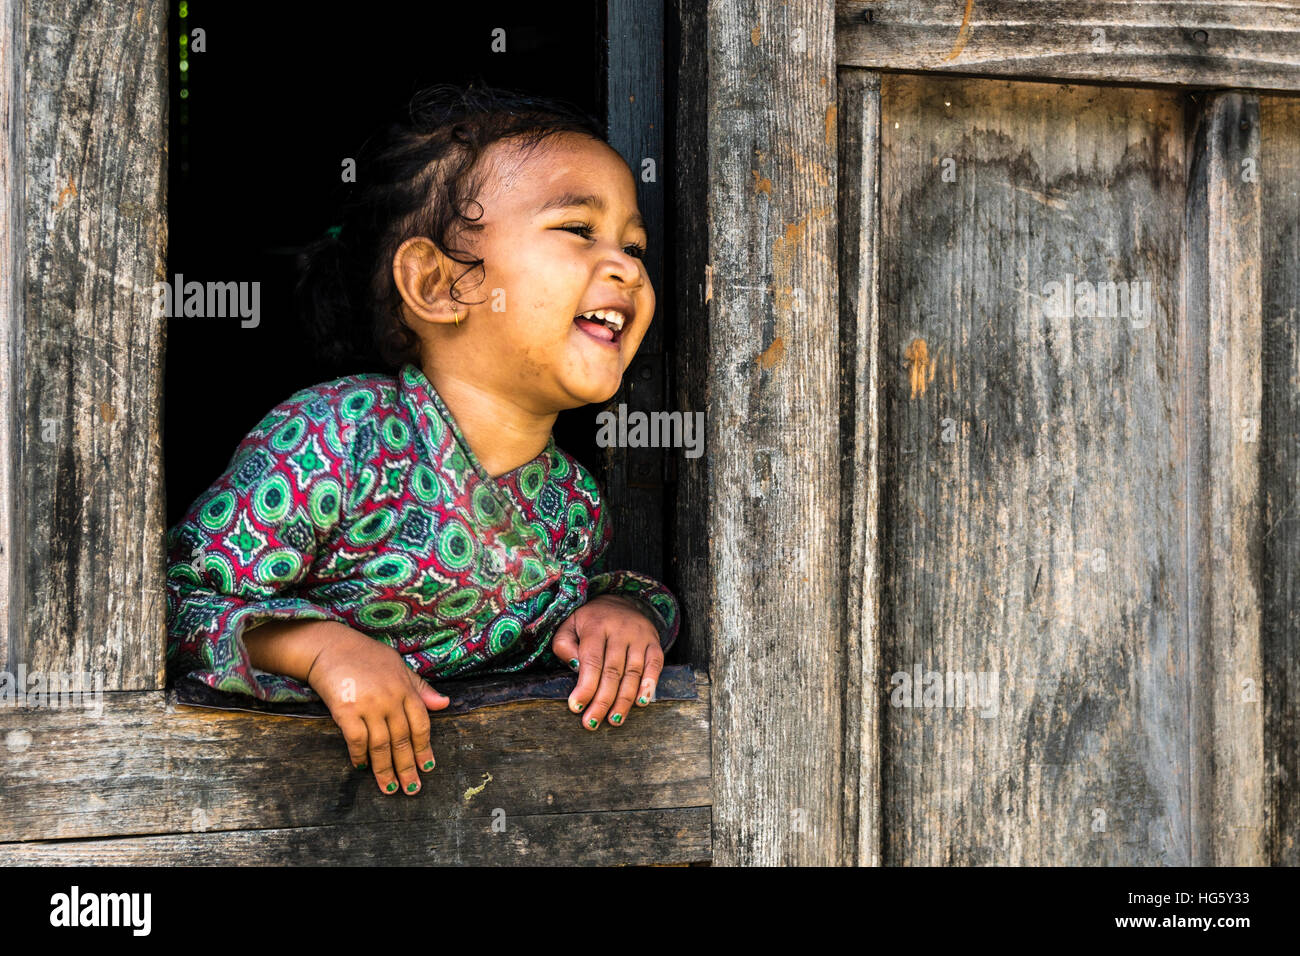 Portrait of loughing little girl, Upper Marsyangdi valley, looking out of a window, Bagarchap, Manang District, Nepal Stock Photo